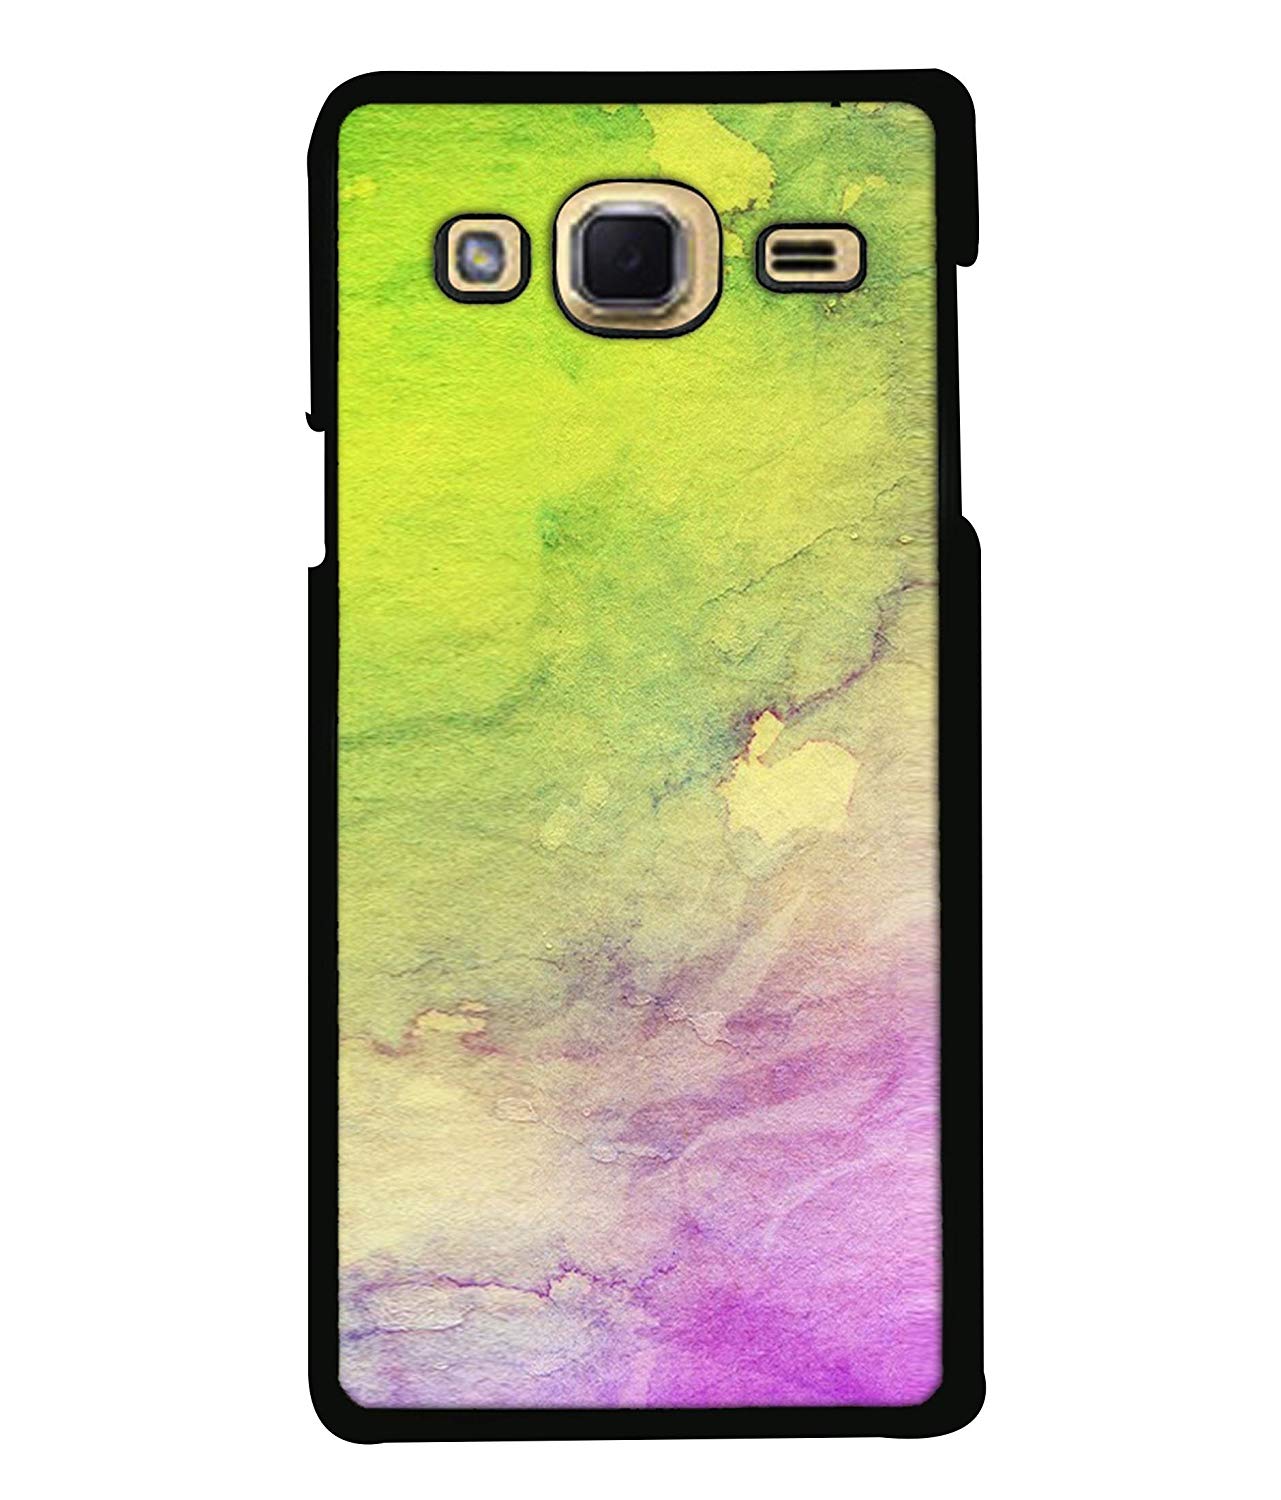 Fuson Designer Back Case Cover For Samsung Galaxy J3 - Iphone , HD Wallpaper & Backgrounds